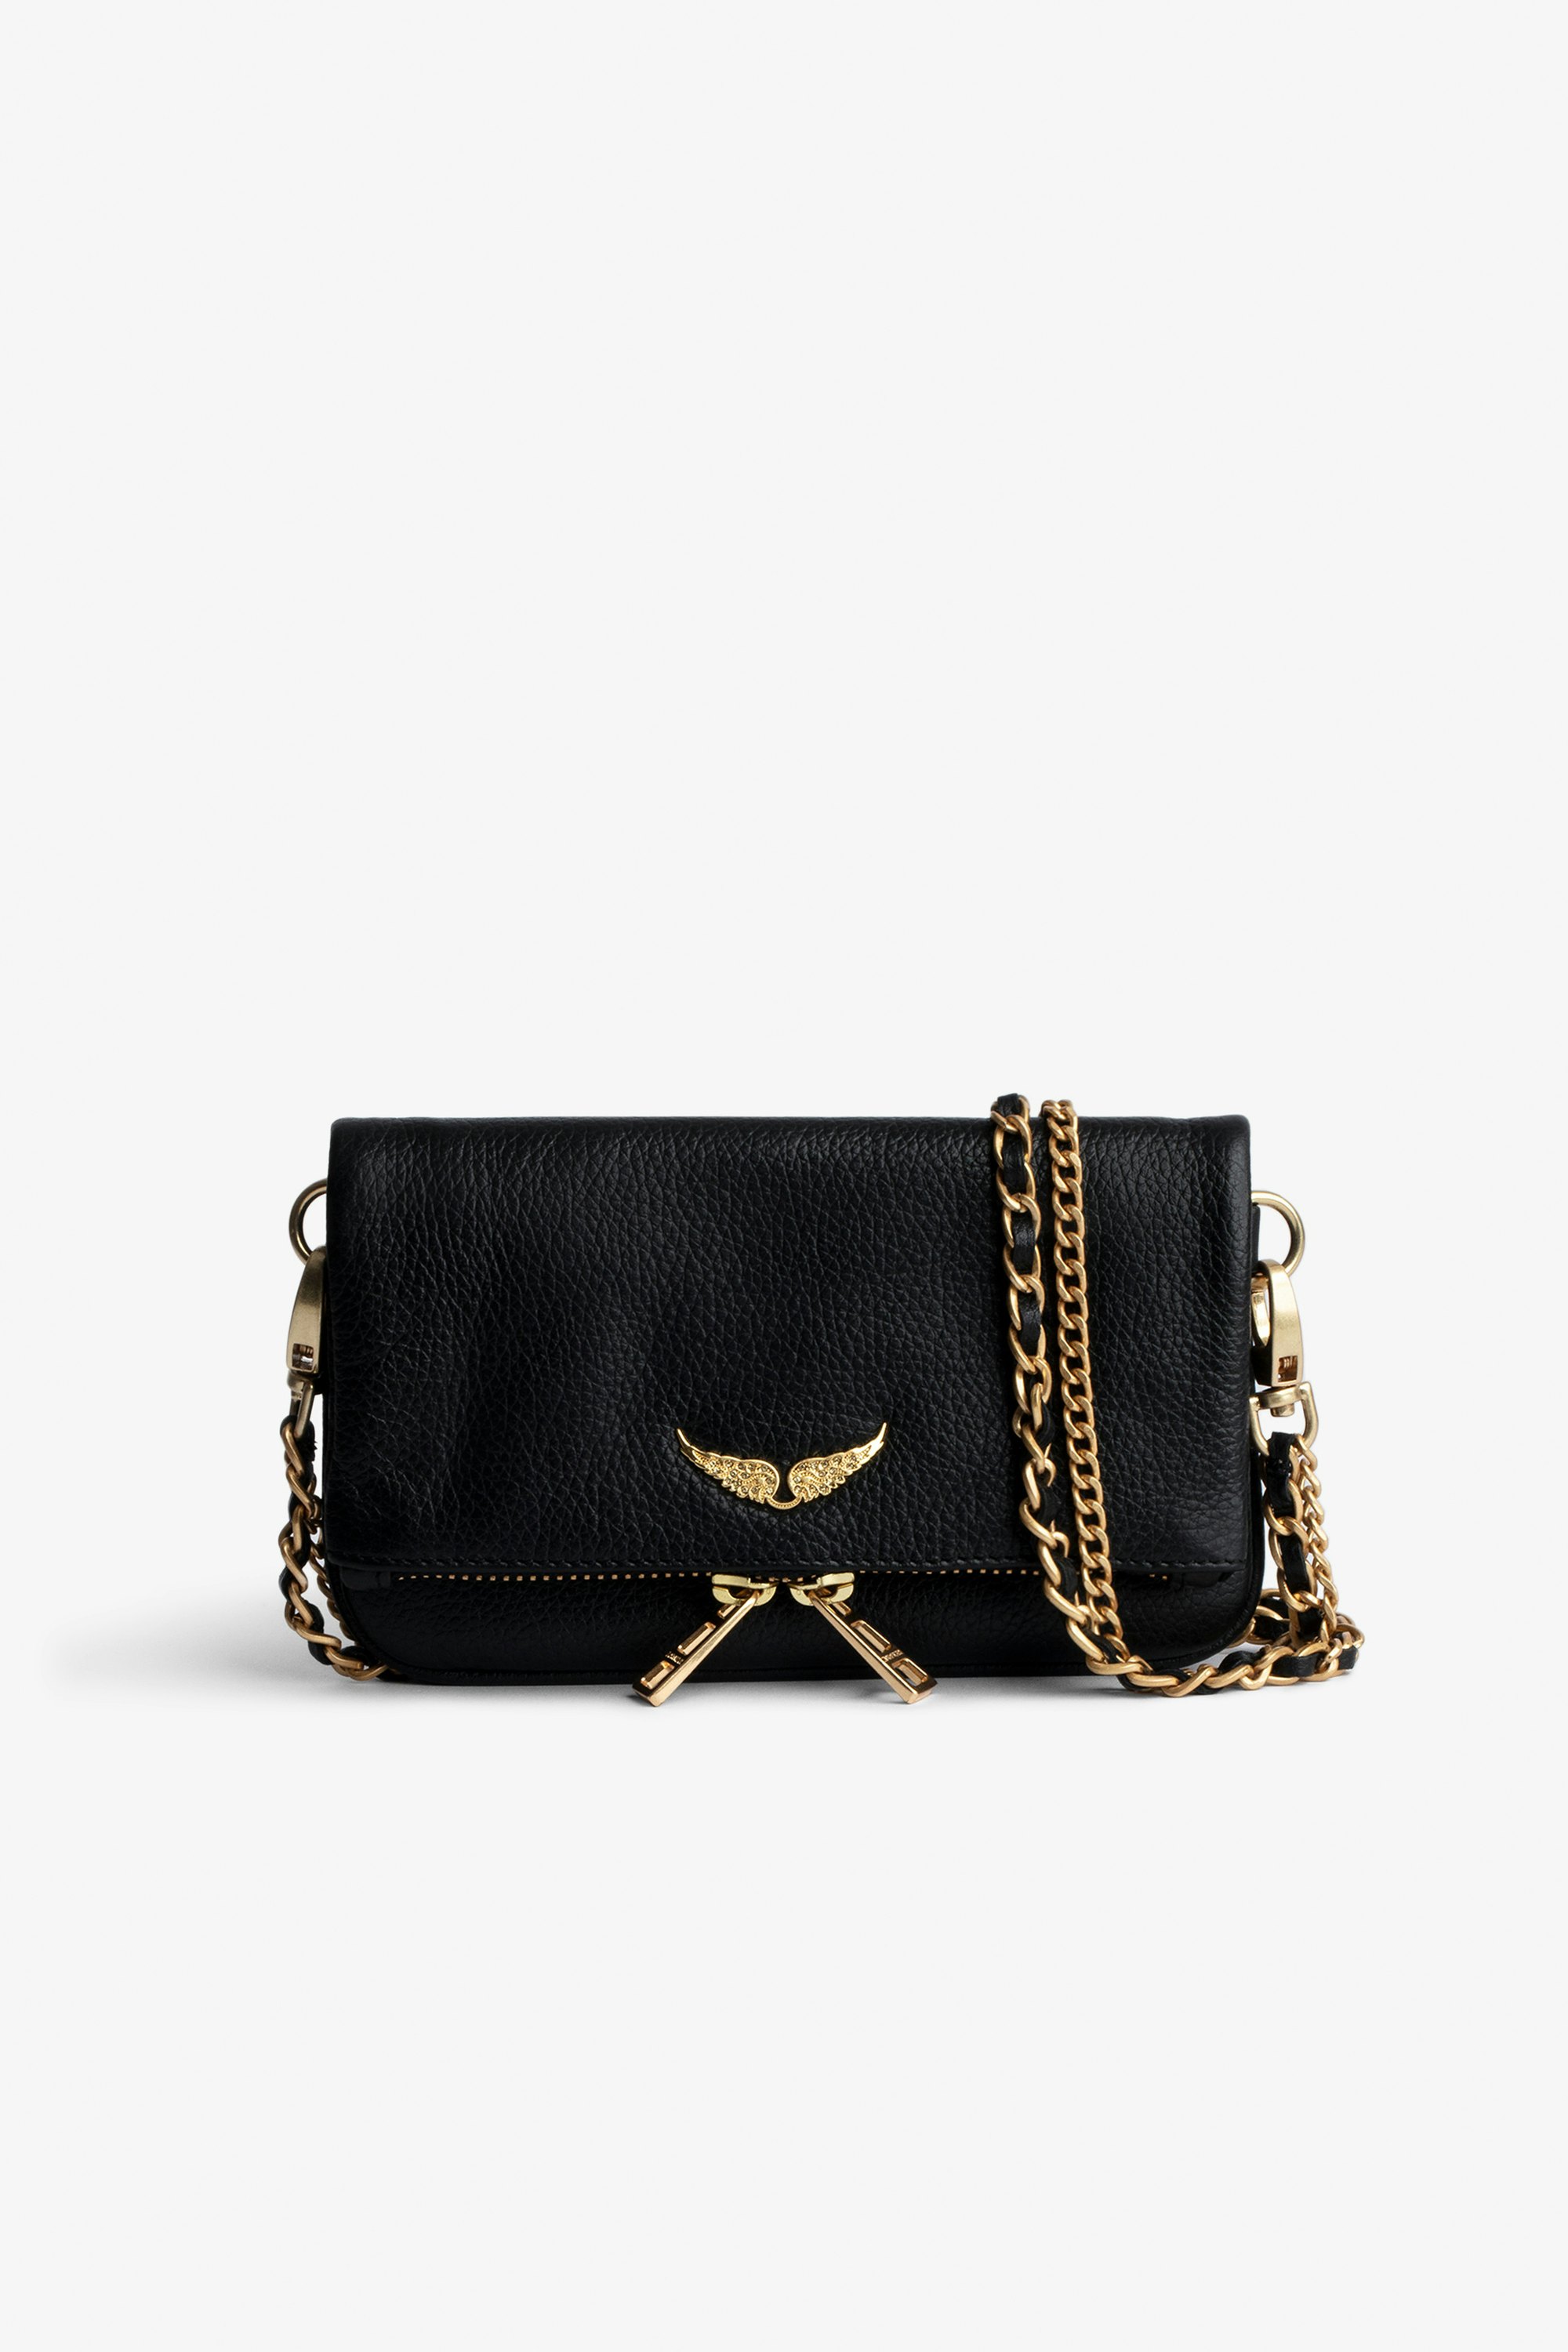 Rock Nano Grained Clutch - Women’s black grained leather Rock Nano clutch with leather shoulder strap and gold-toned chain